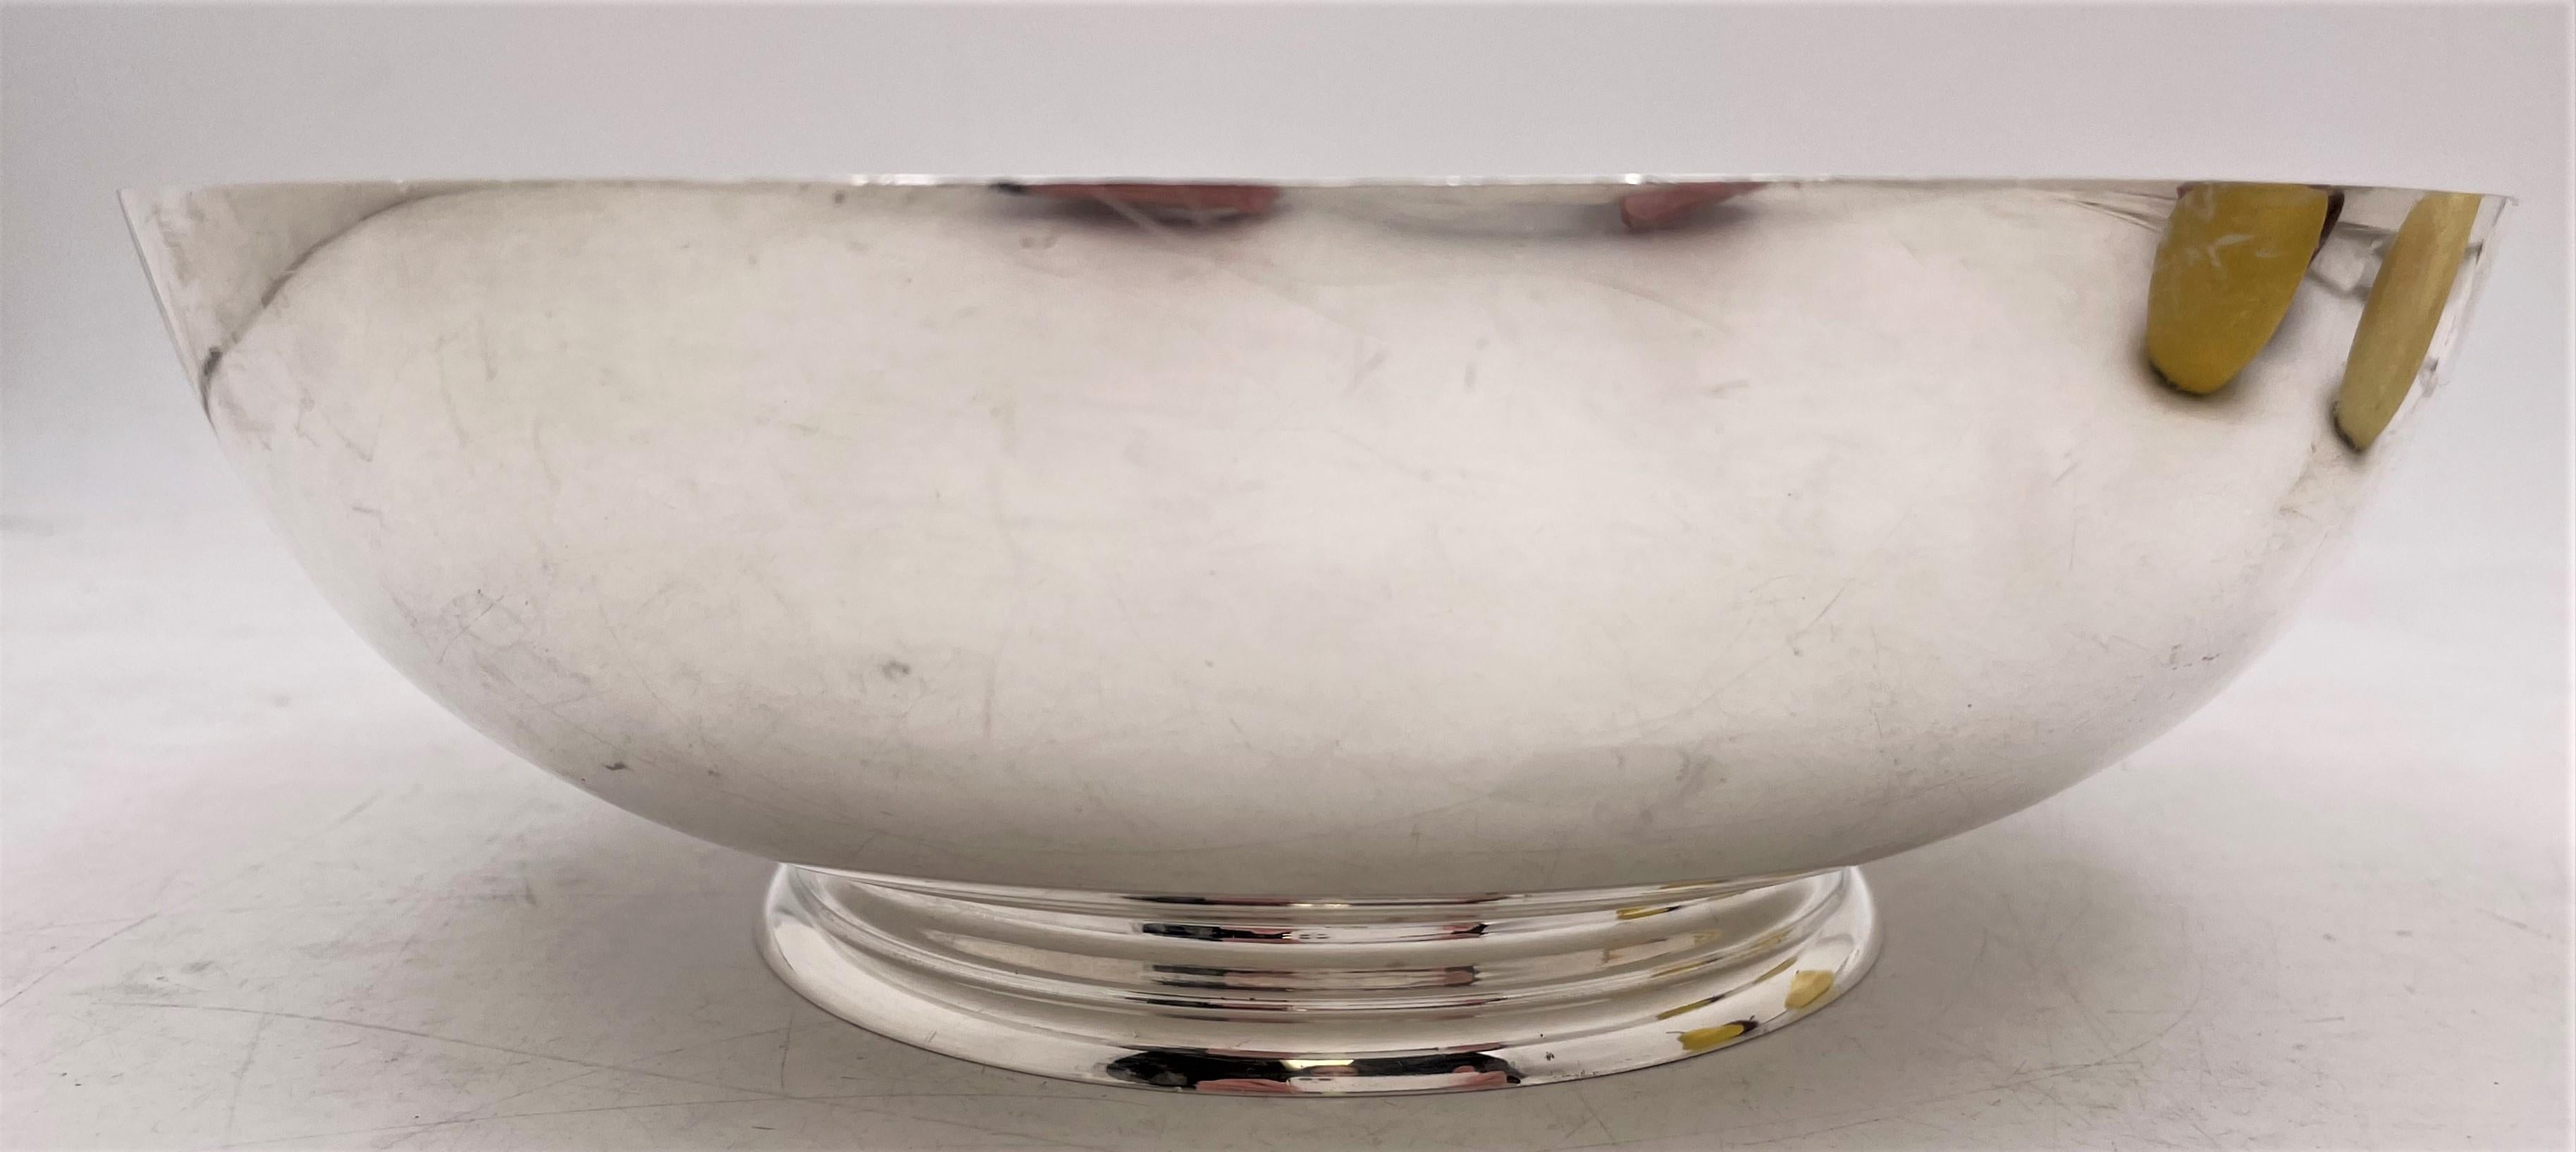 Tiffany & Co., sterling silver bowl in pattern number 24023 from the 1950s or 1960s in Mid-Century Modern style with a beautiful geometric design, standing on a base, measuring 8 3/4'' in diameter by 3'' in height, weighing 22 troy ounces, and